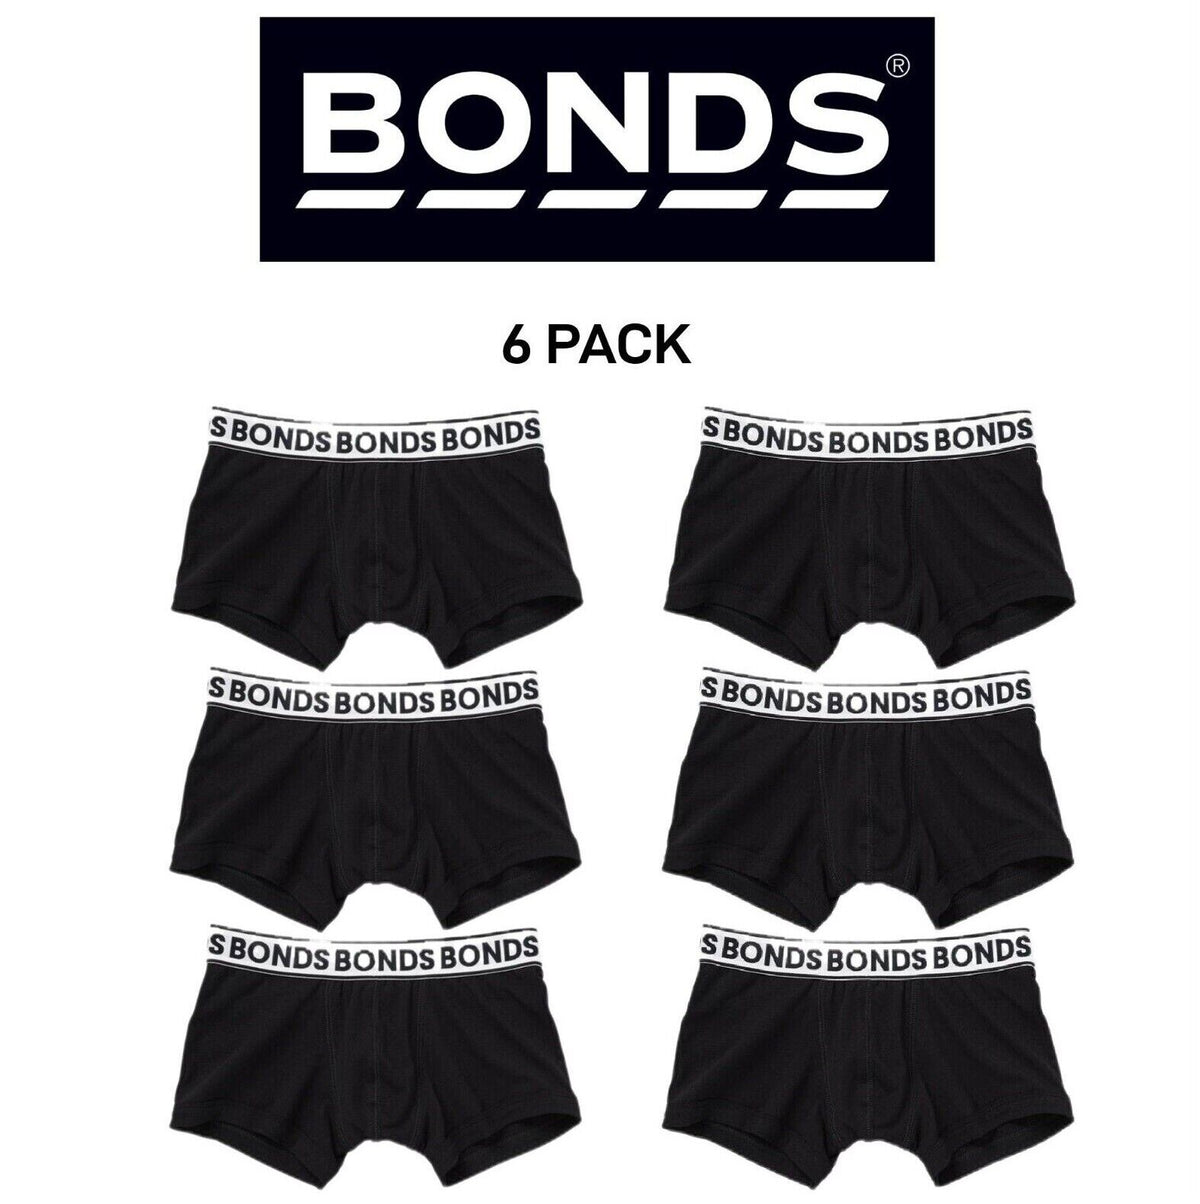 Bonds Boys New Era Fit Trunk Very Soft Comfortable Wide Waistband 6 Pack UYB71A